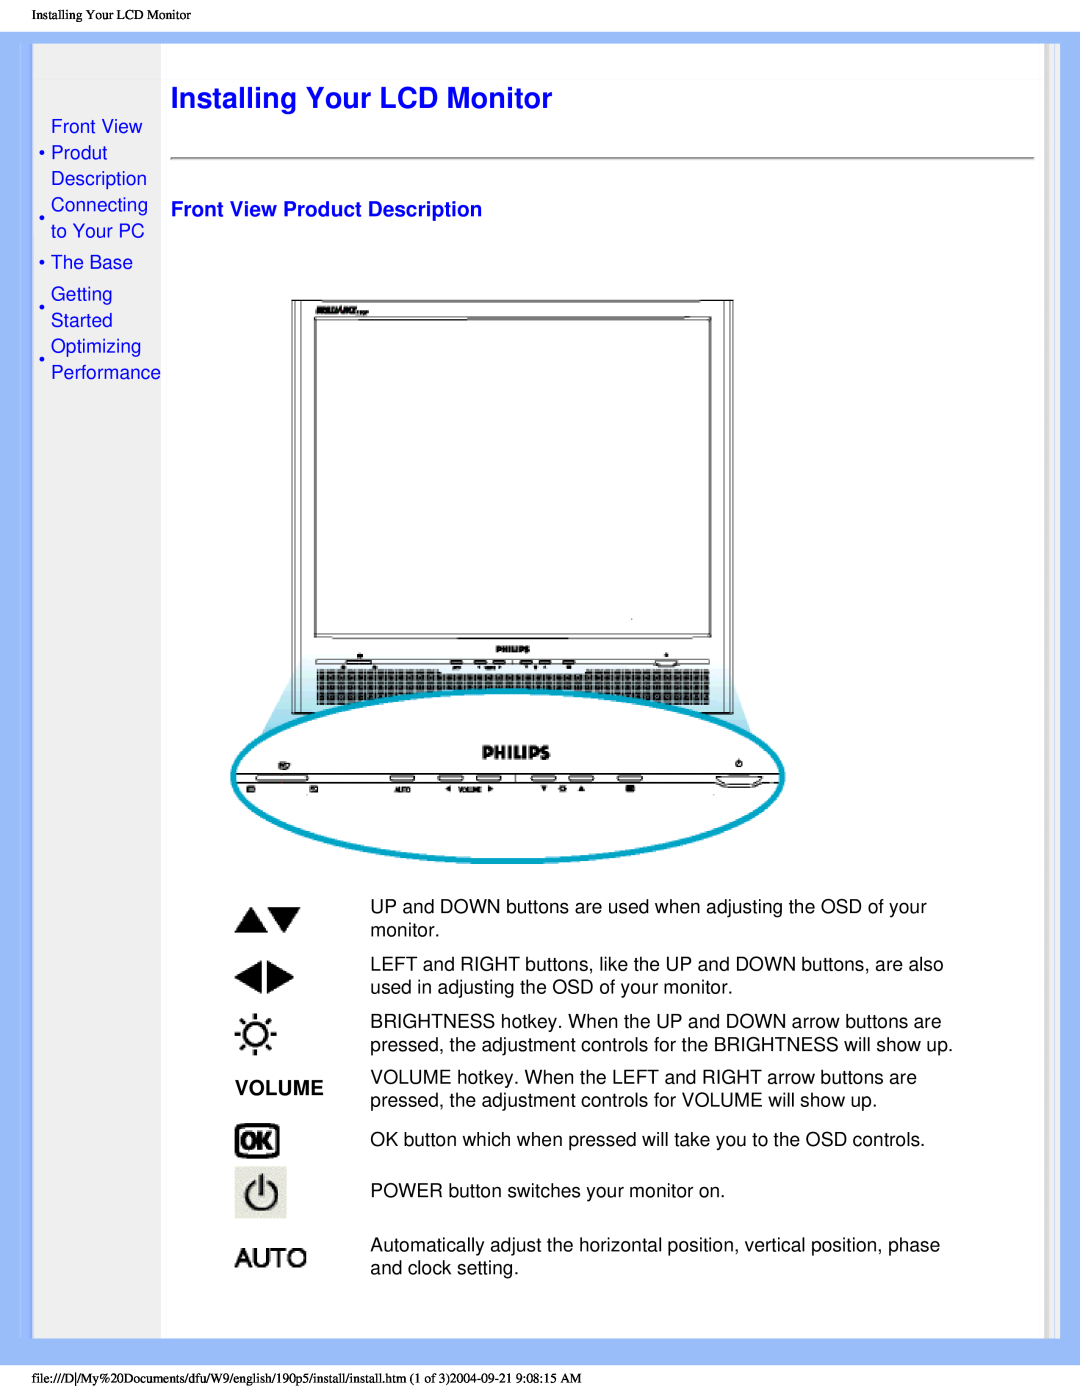 Philips 190PS user manual Installing Your LCD Monitor, Front View Product Description, Volume 